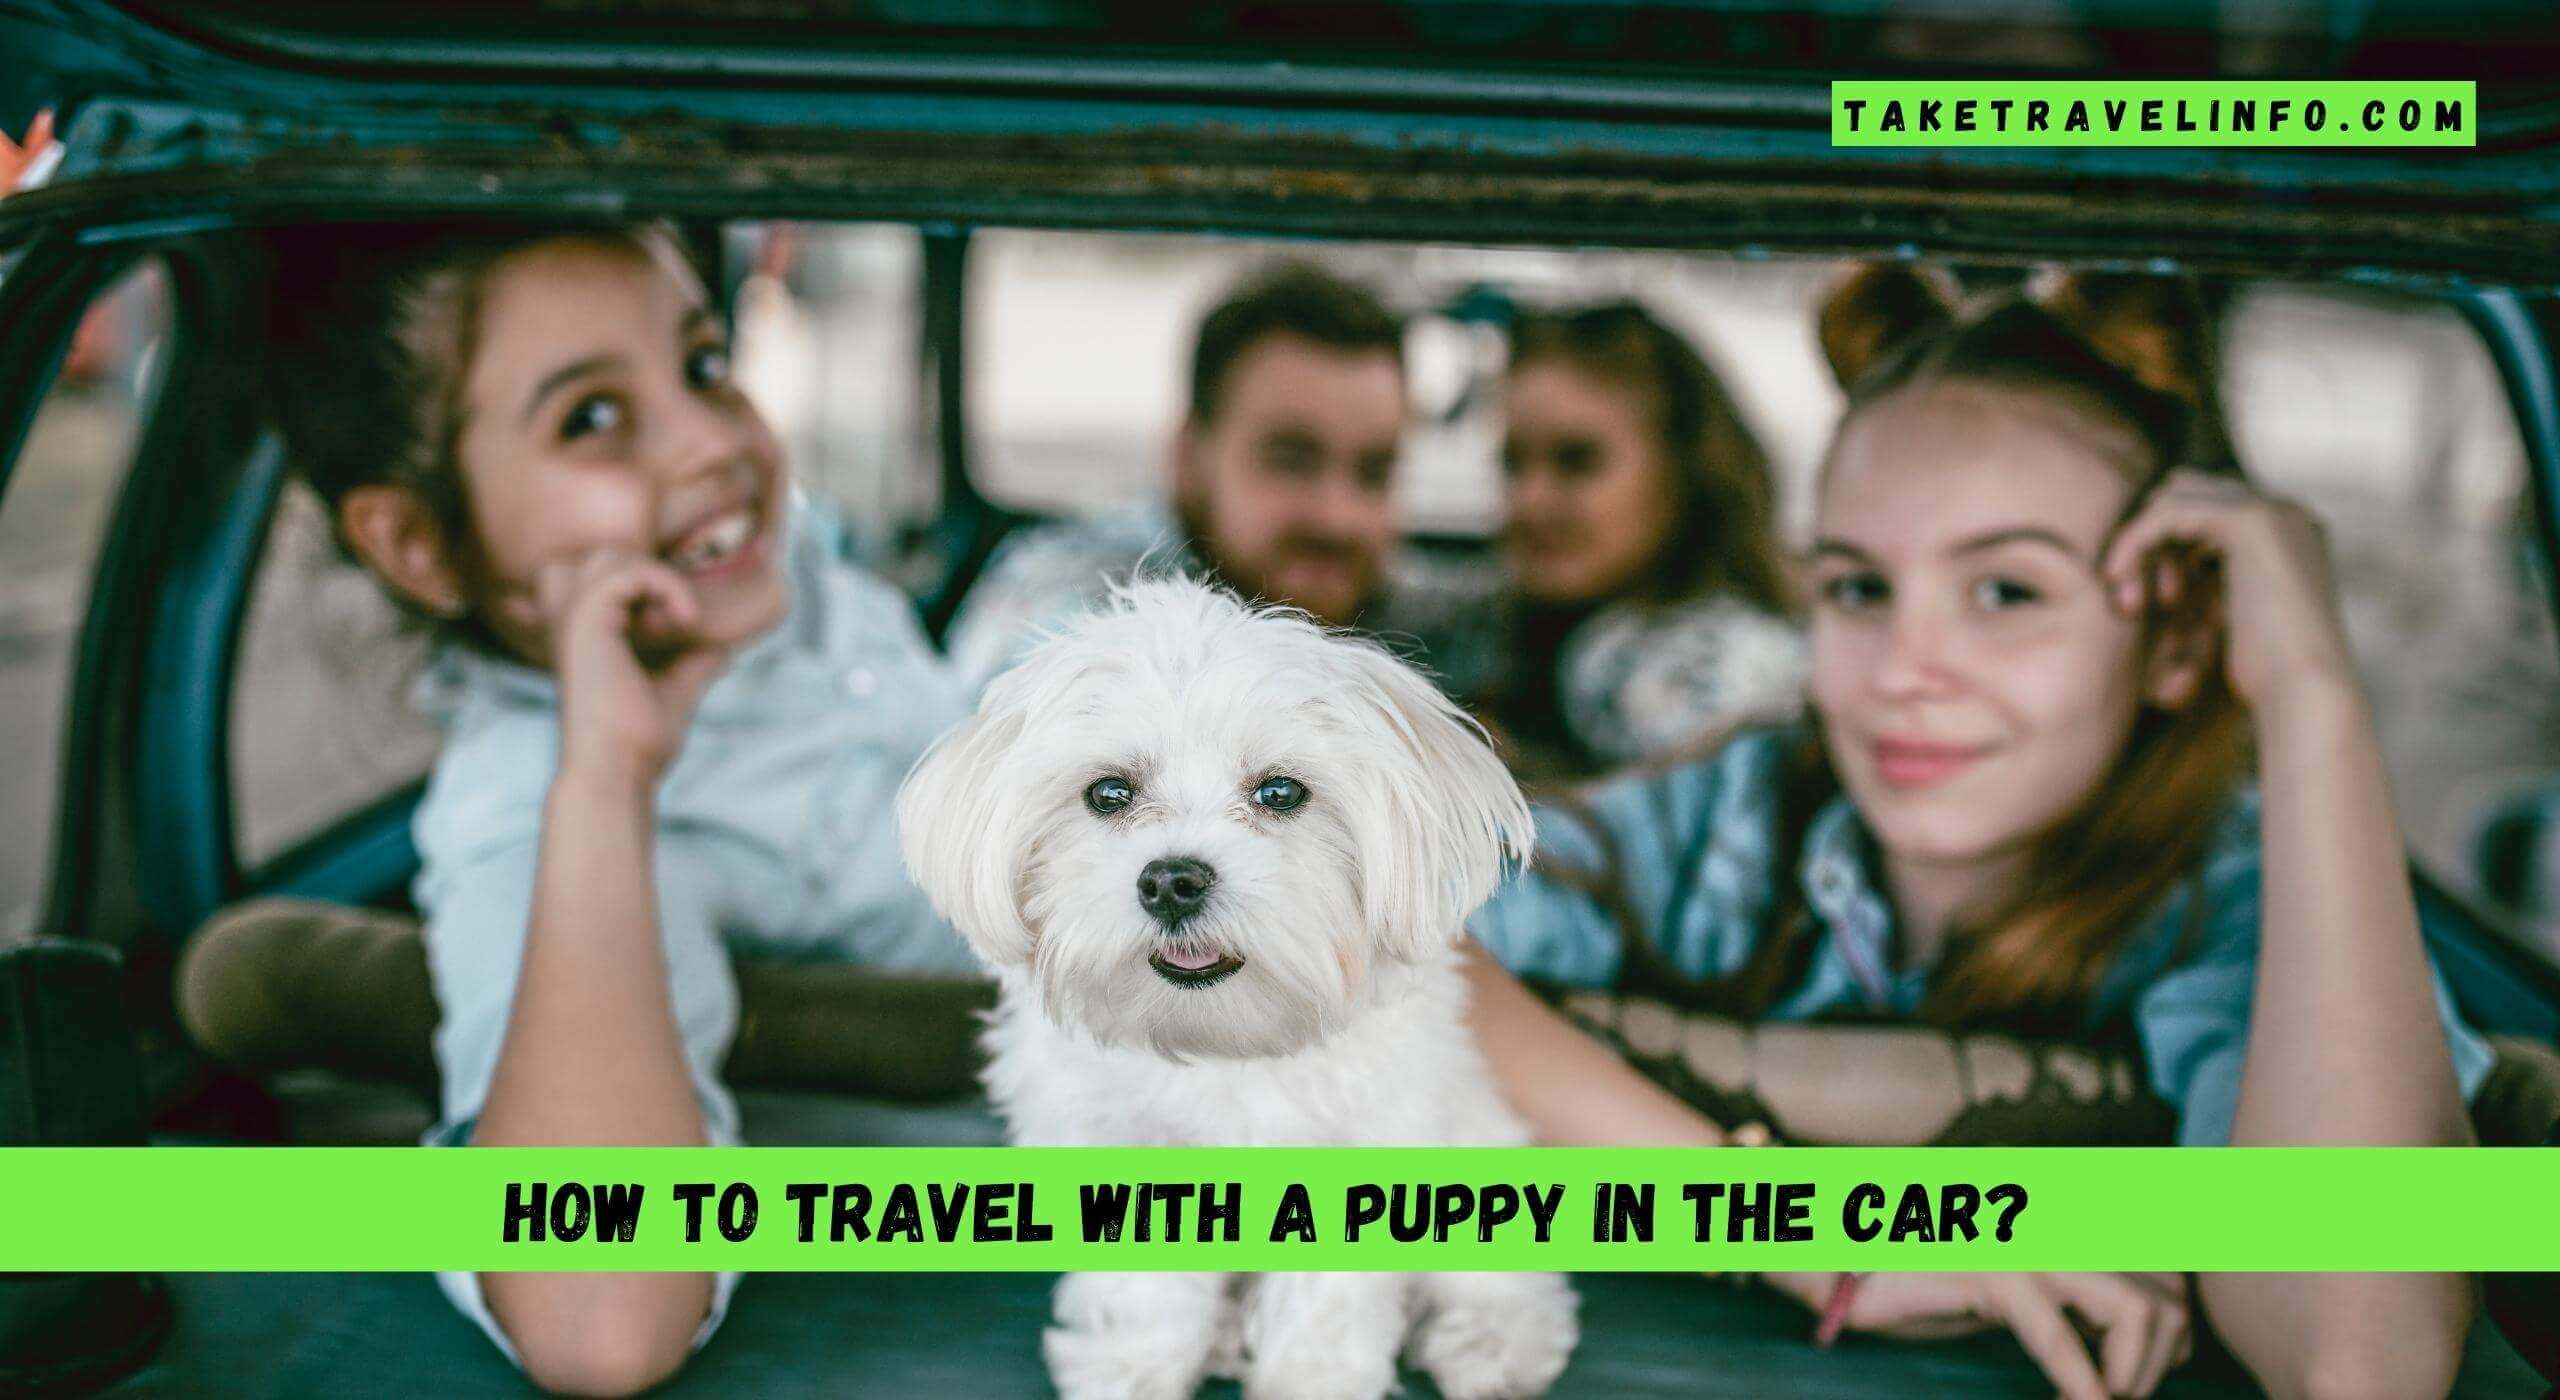 How to Travel With a Puppy in the Car?